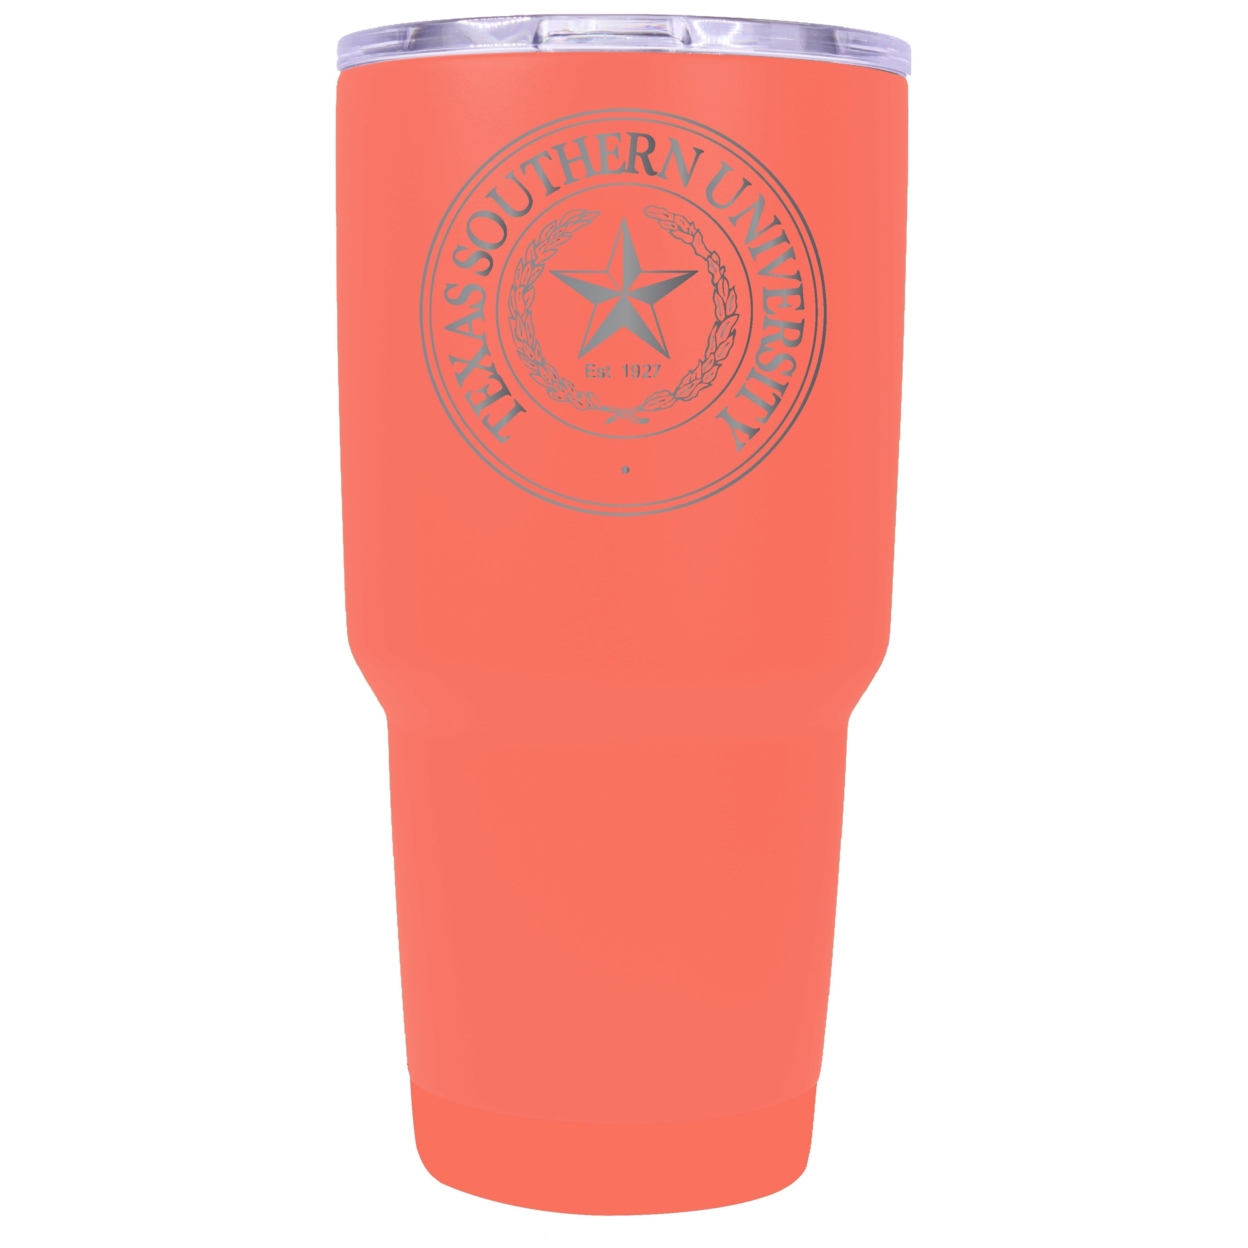 Texas Southern University 24 Oz Laser Engraved Stainless Steel Insulated Tumbler - Choose Your Color. - Coral